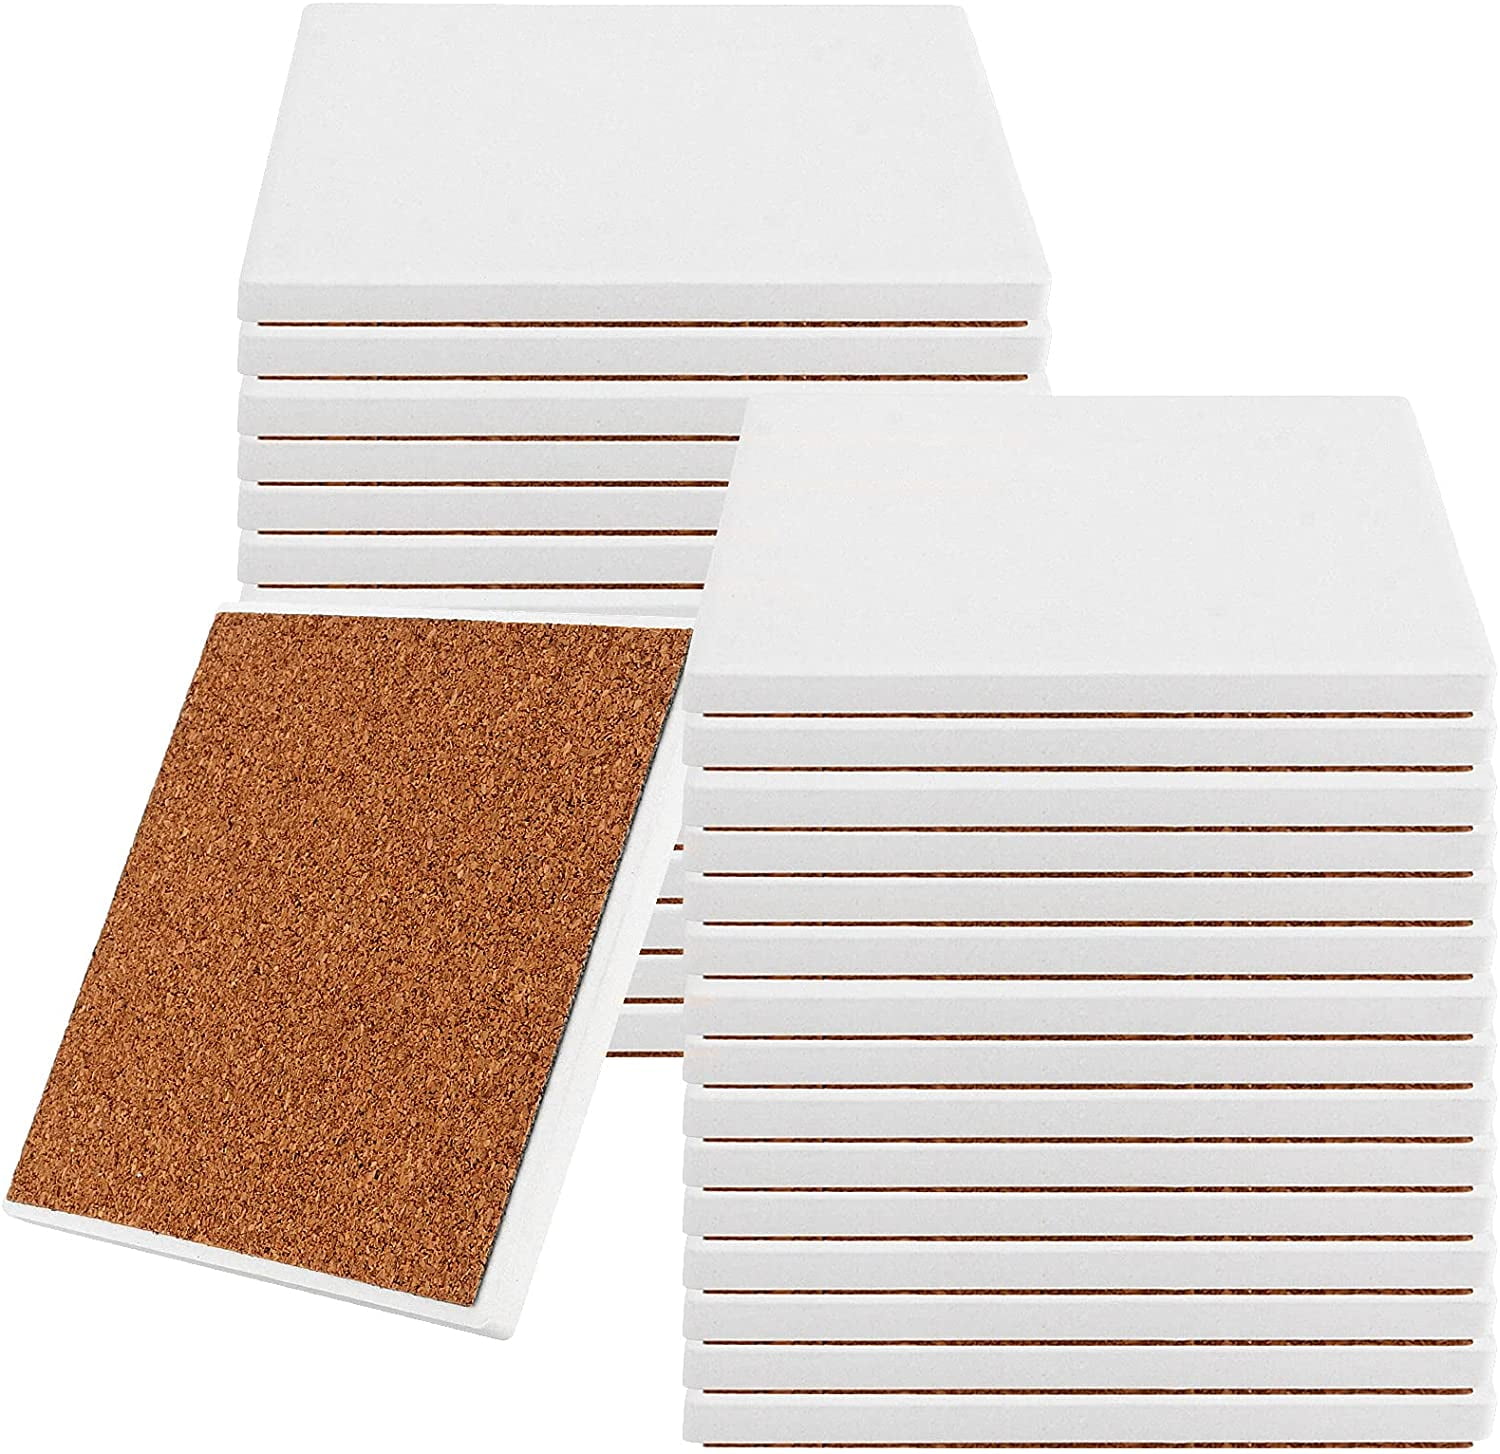 24 Pack Blank Square Ceramic Stone Tile Coasters for Crafts, 4 24-cork  Backing Pads, Alcohol Ink, Decoupage, Mod Podge DIY Coasters 